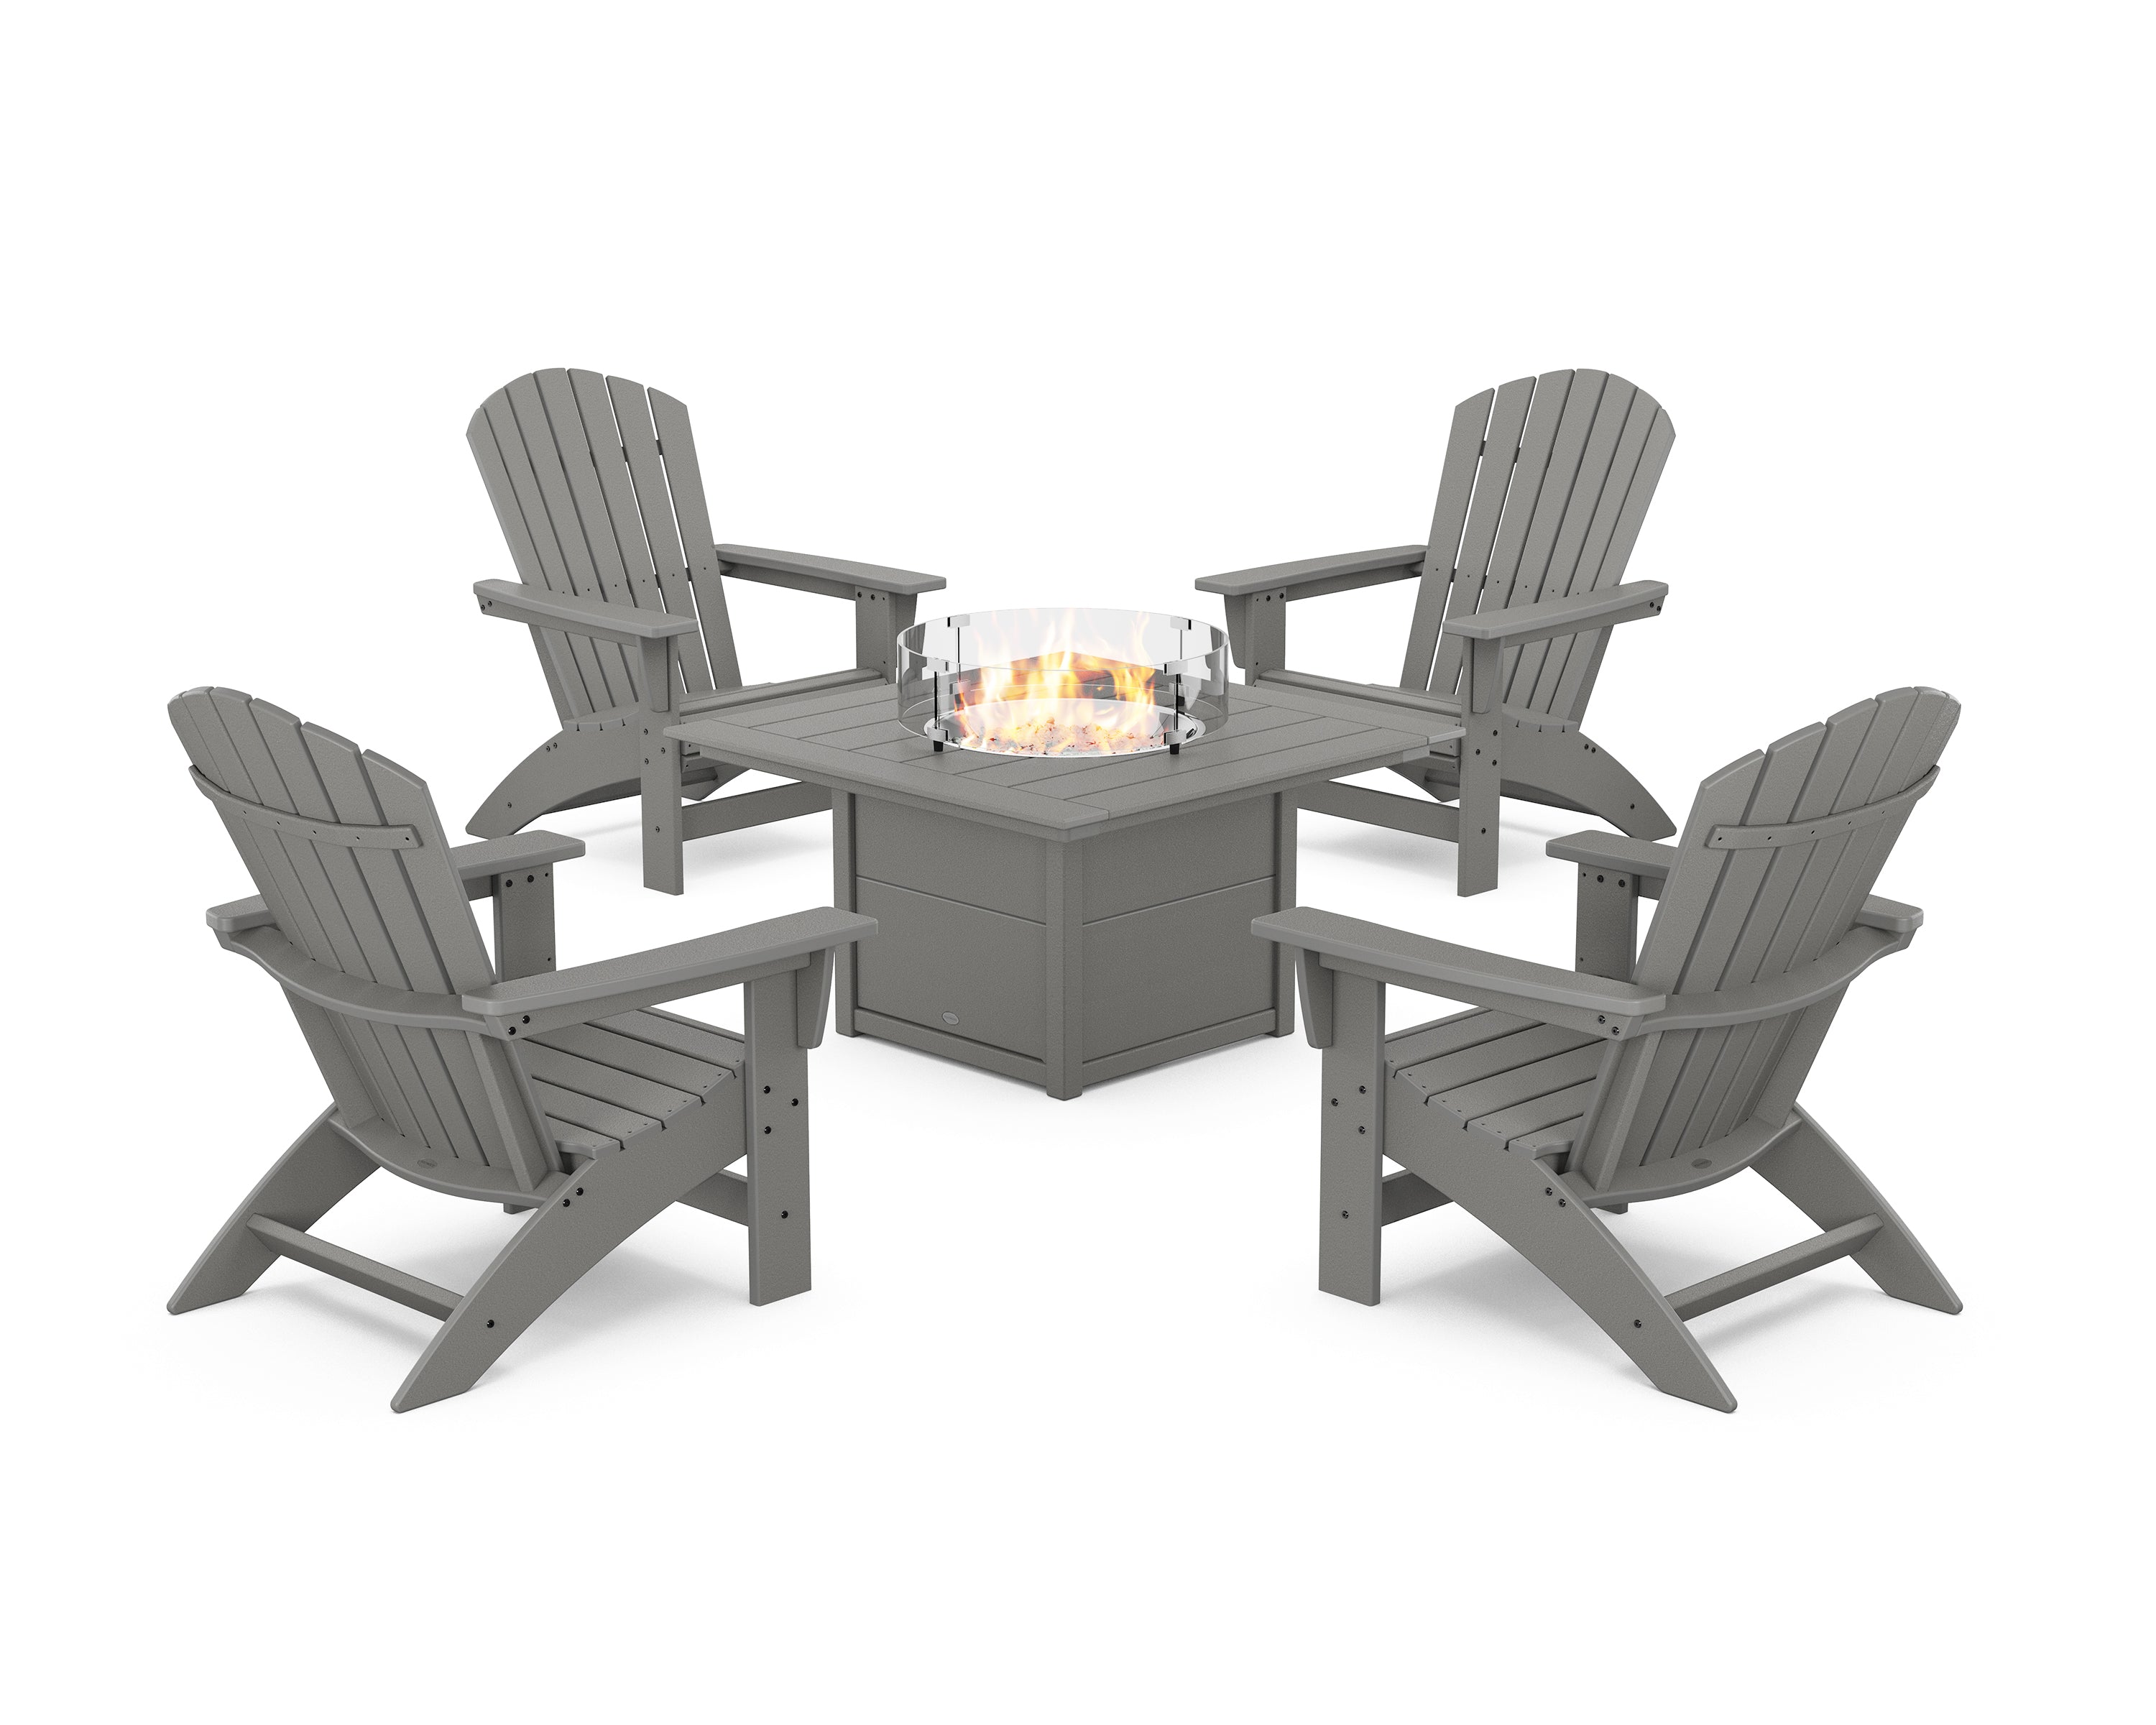 POLYWOOD® 5-Piece Nautical Grand Adirondack Conversation Set with Fire Pit Table in Slate Grey